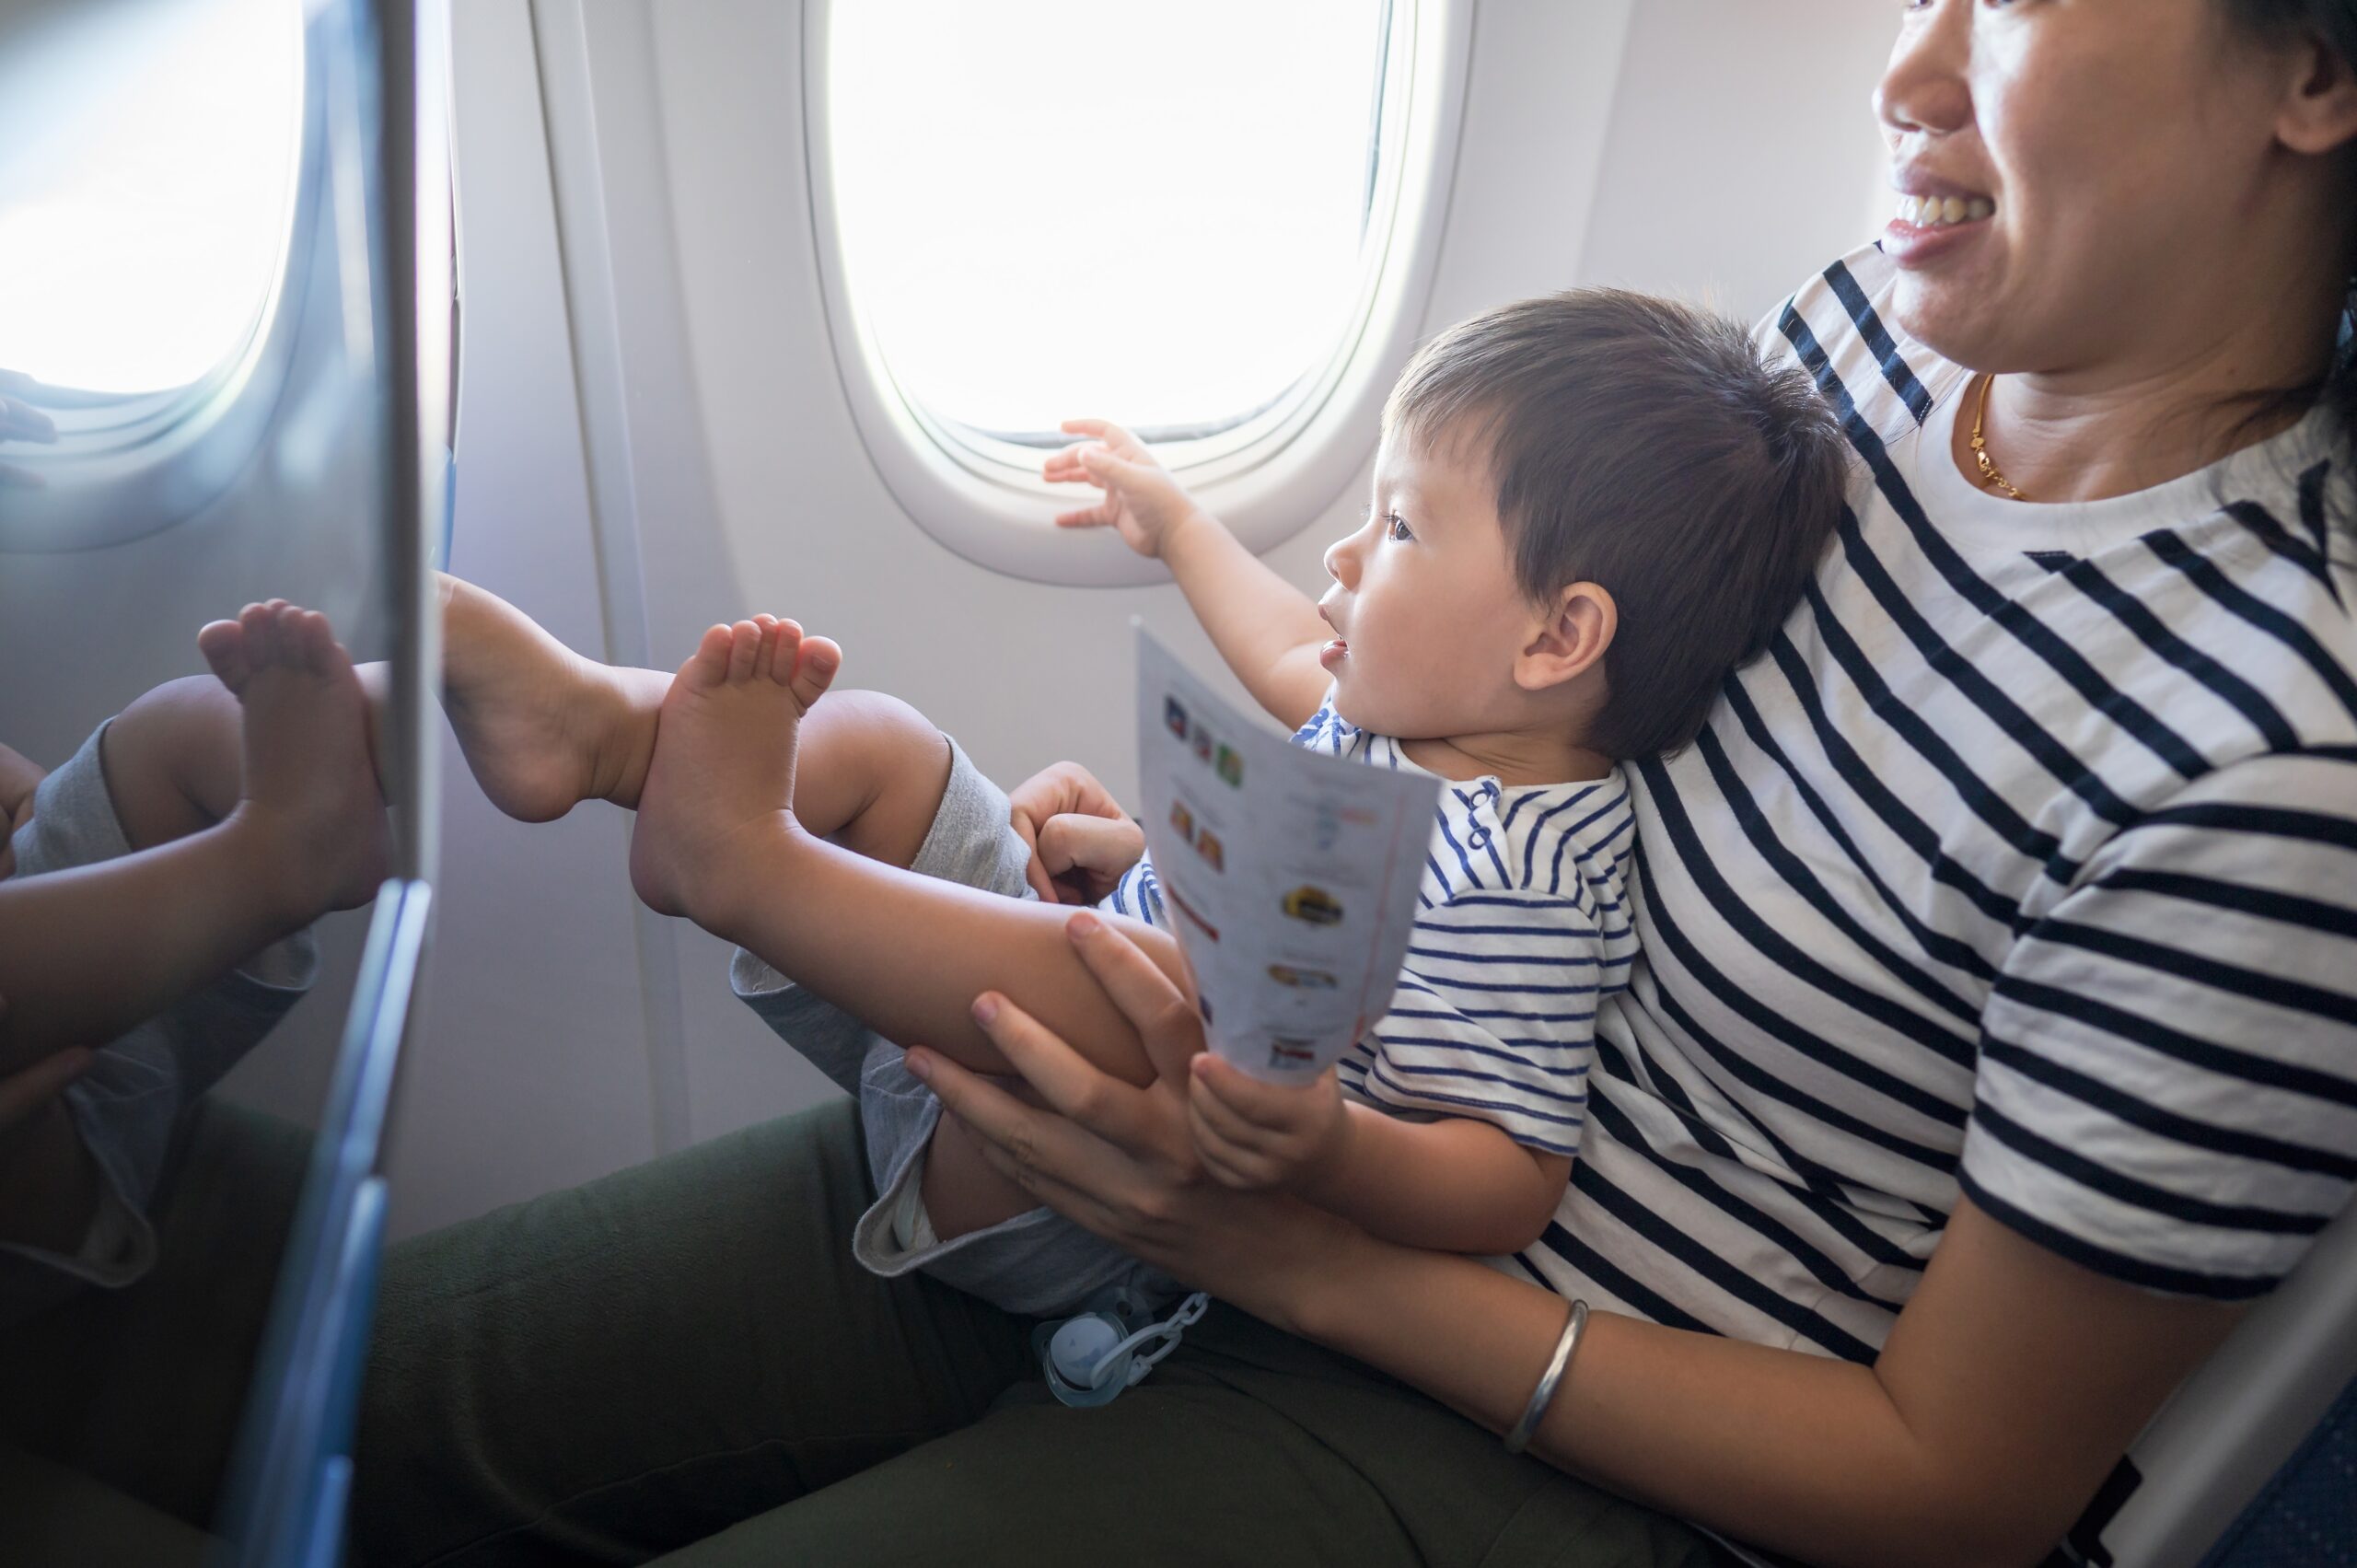 turkish-airline-generates-controversy-by-enabling-a-prohibited-area-for-children-on-its-planes